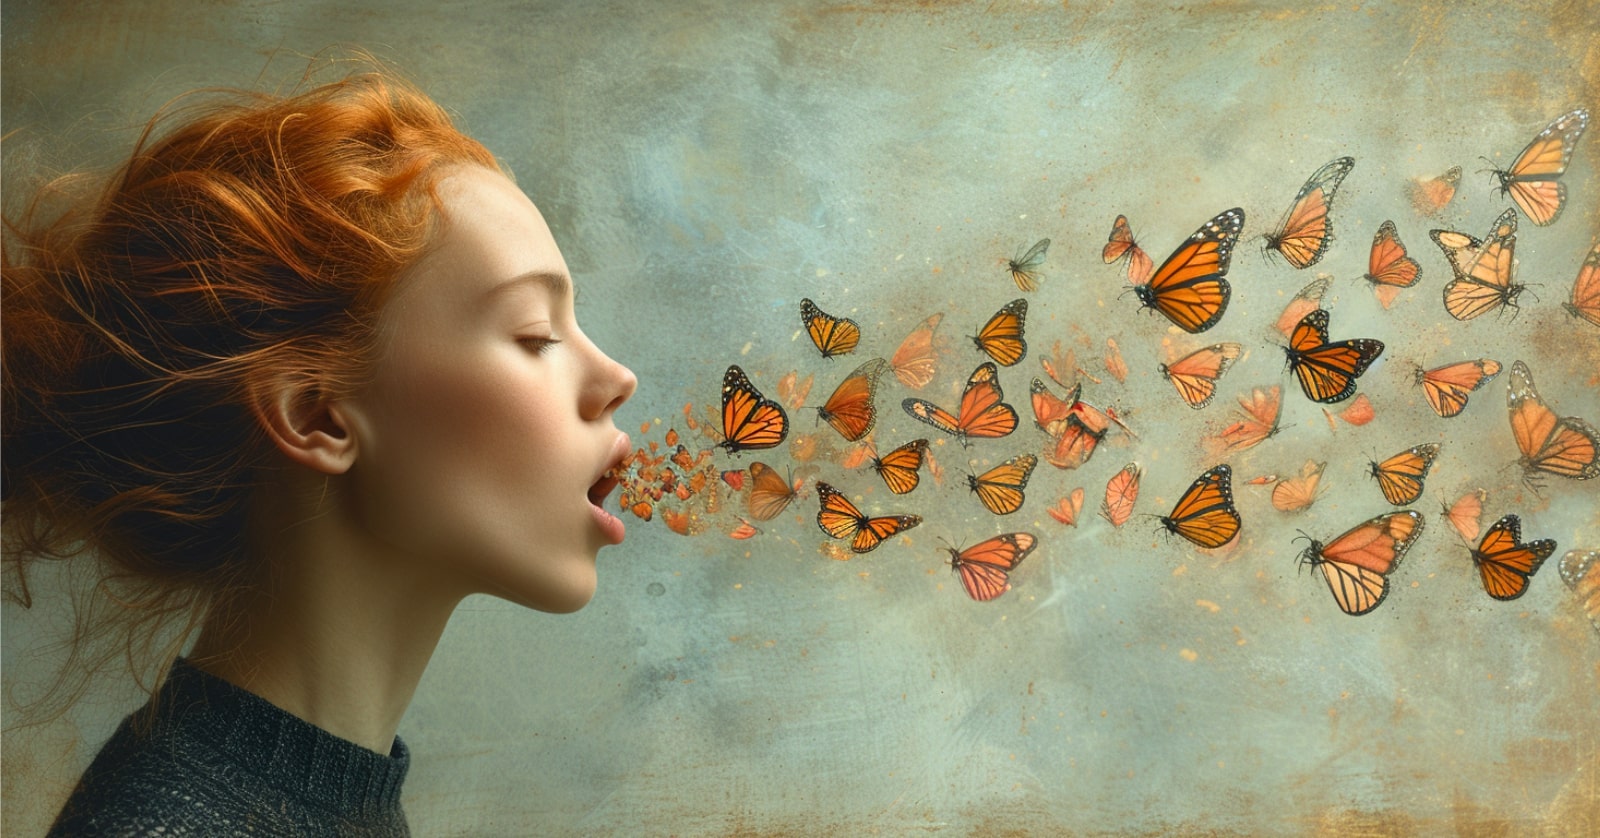 realistic illustration of a side portrait view of a young readhead woman with an open mouth with butterflies flying out of her mouth